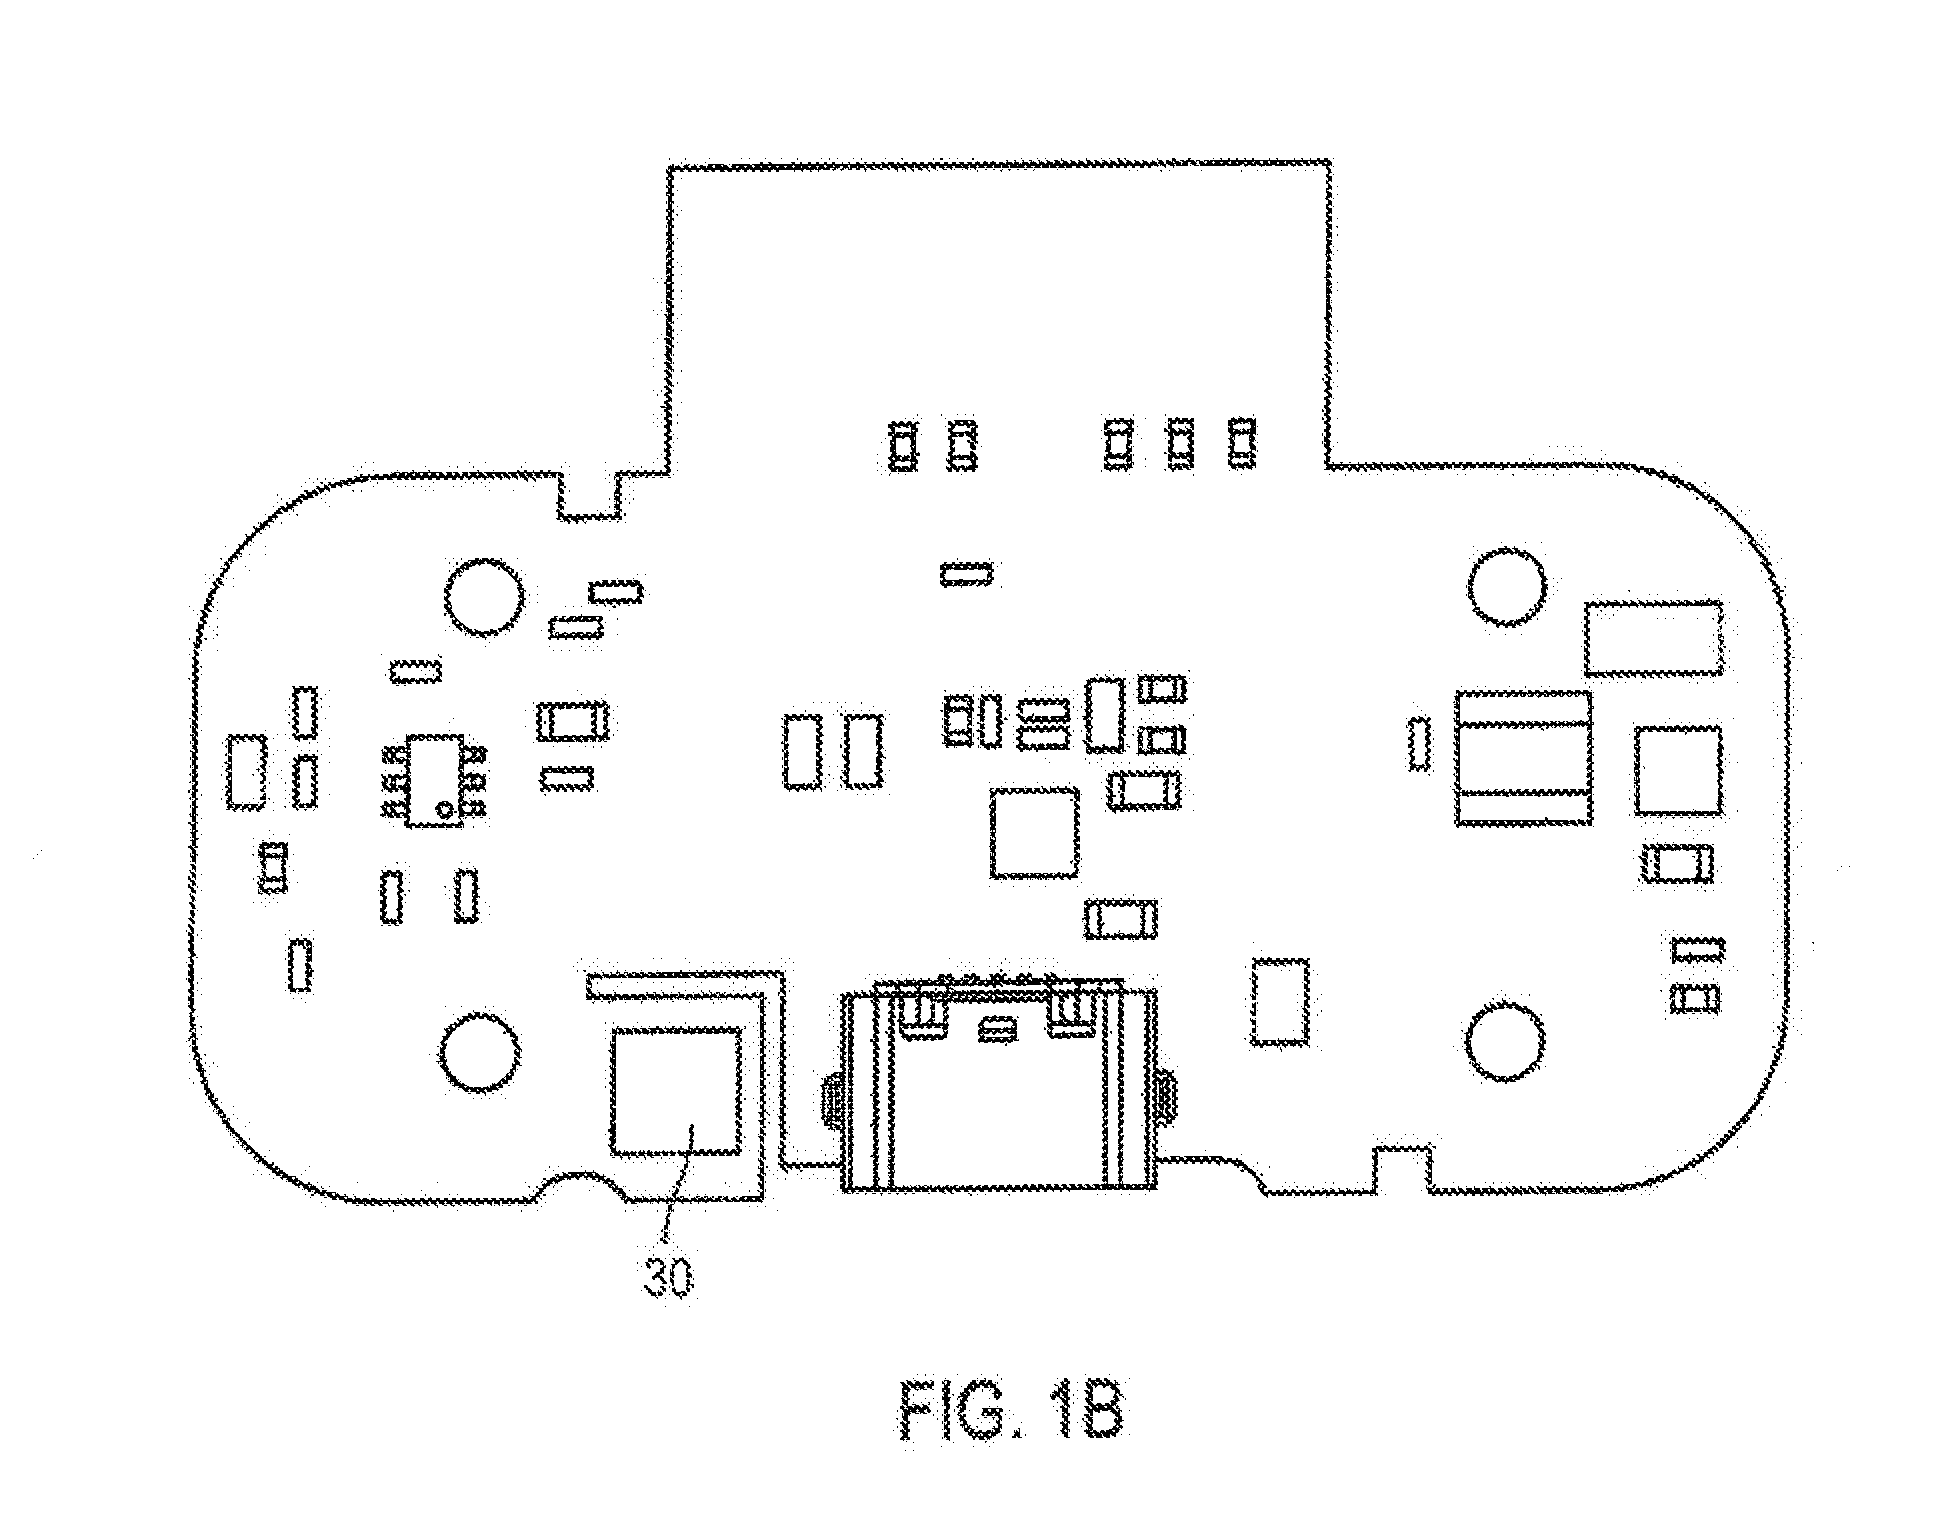 Monitoring device and cognitive behavior therapy